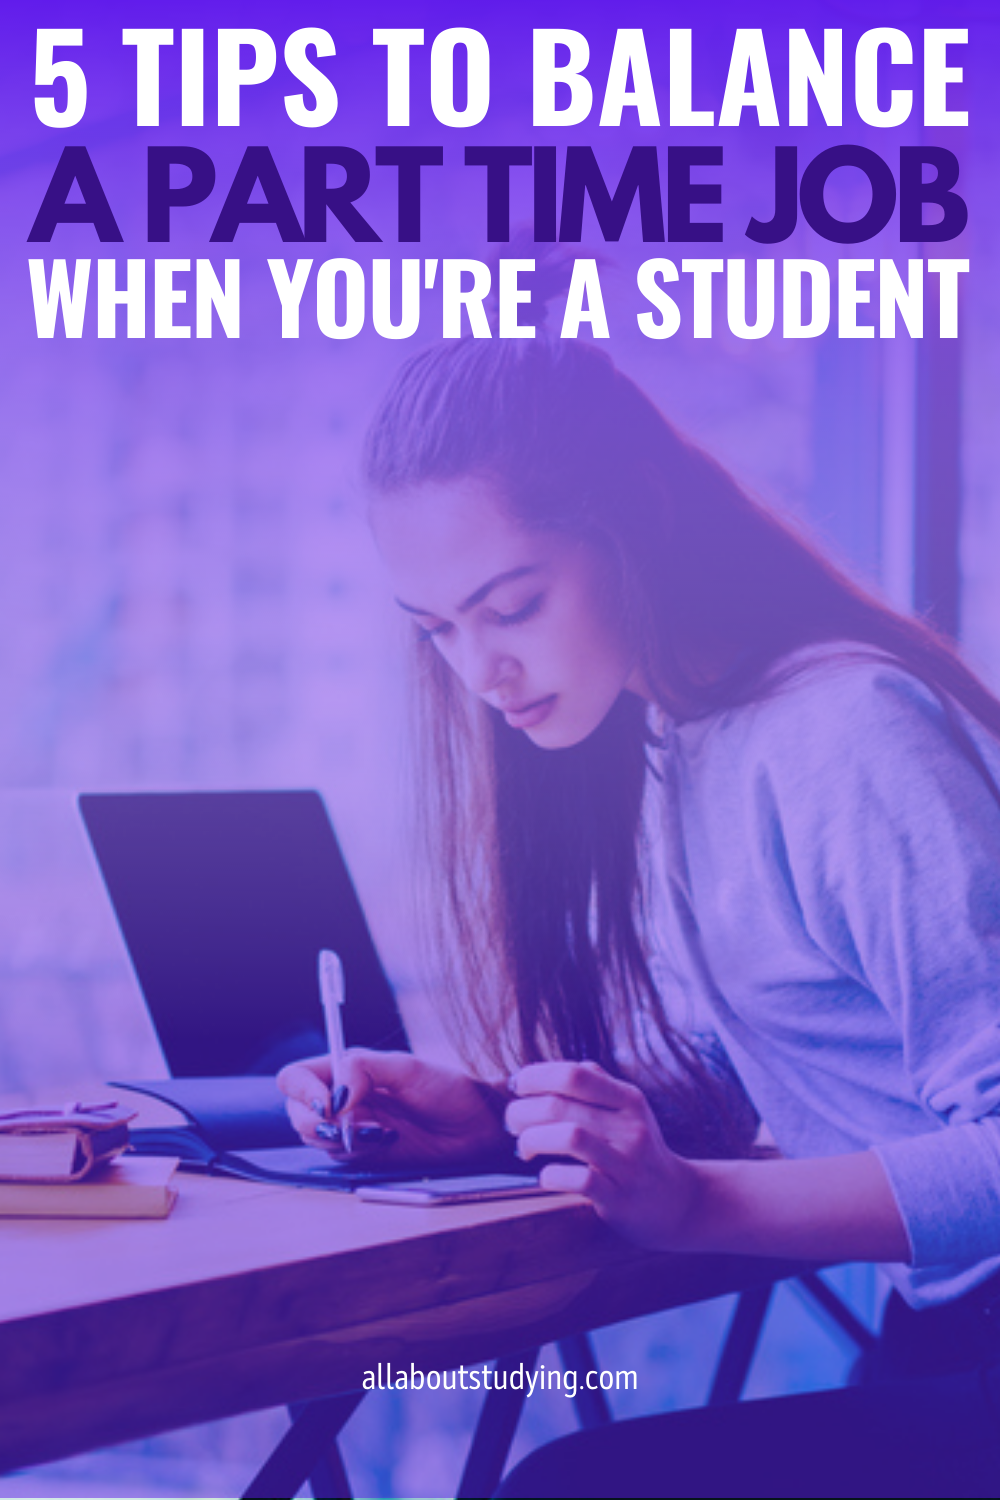 Tips To Balance A Part-Time Job When You’re A Full-Time Student, working student advice #studentlife #workingstudent #sidehustle #parttimejob